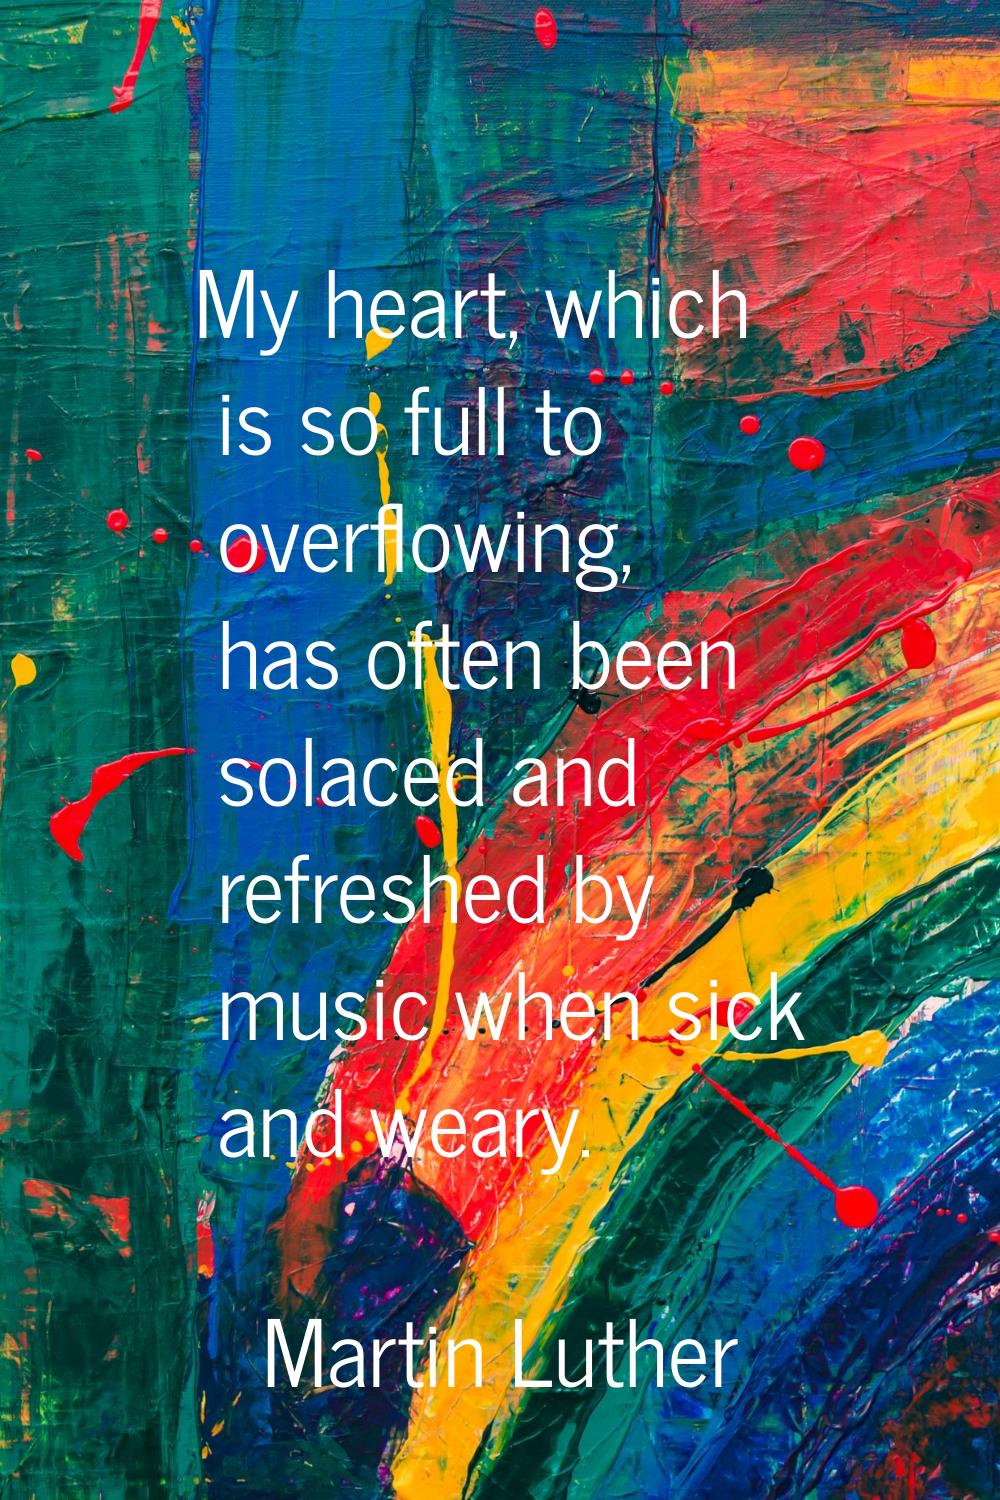 My heart, which is so full to overflowing, has often been solaced and refreshed by music when sick 